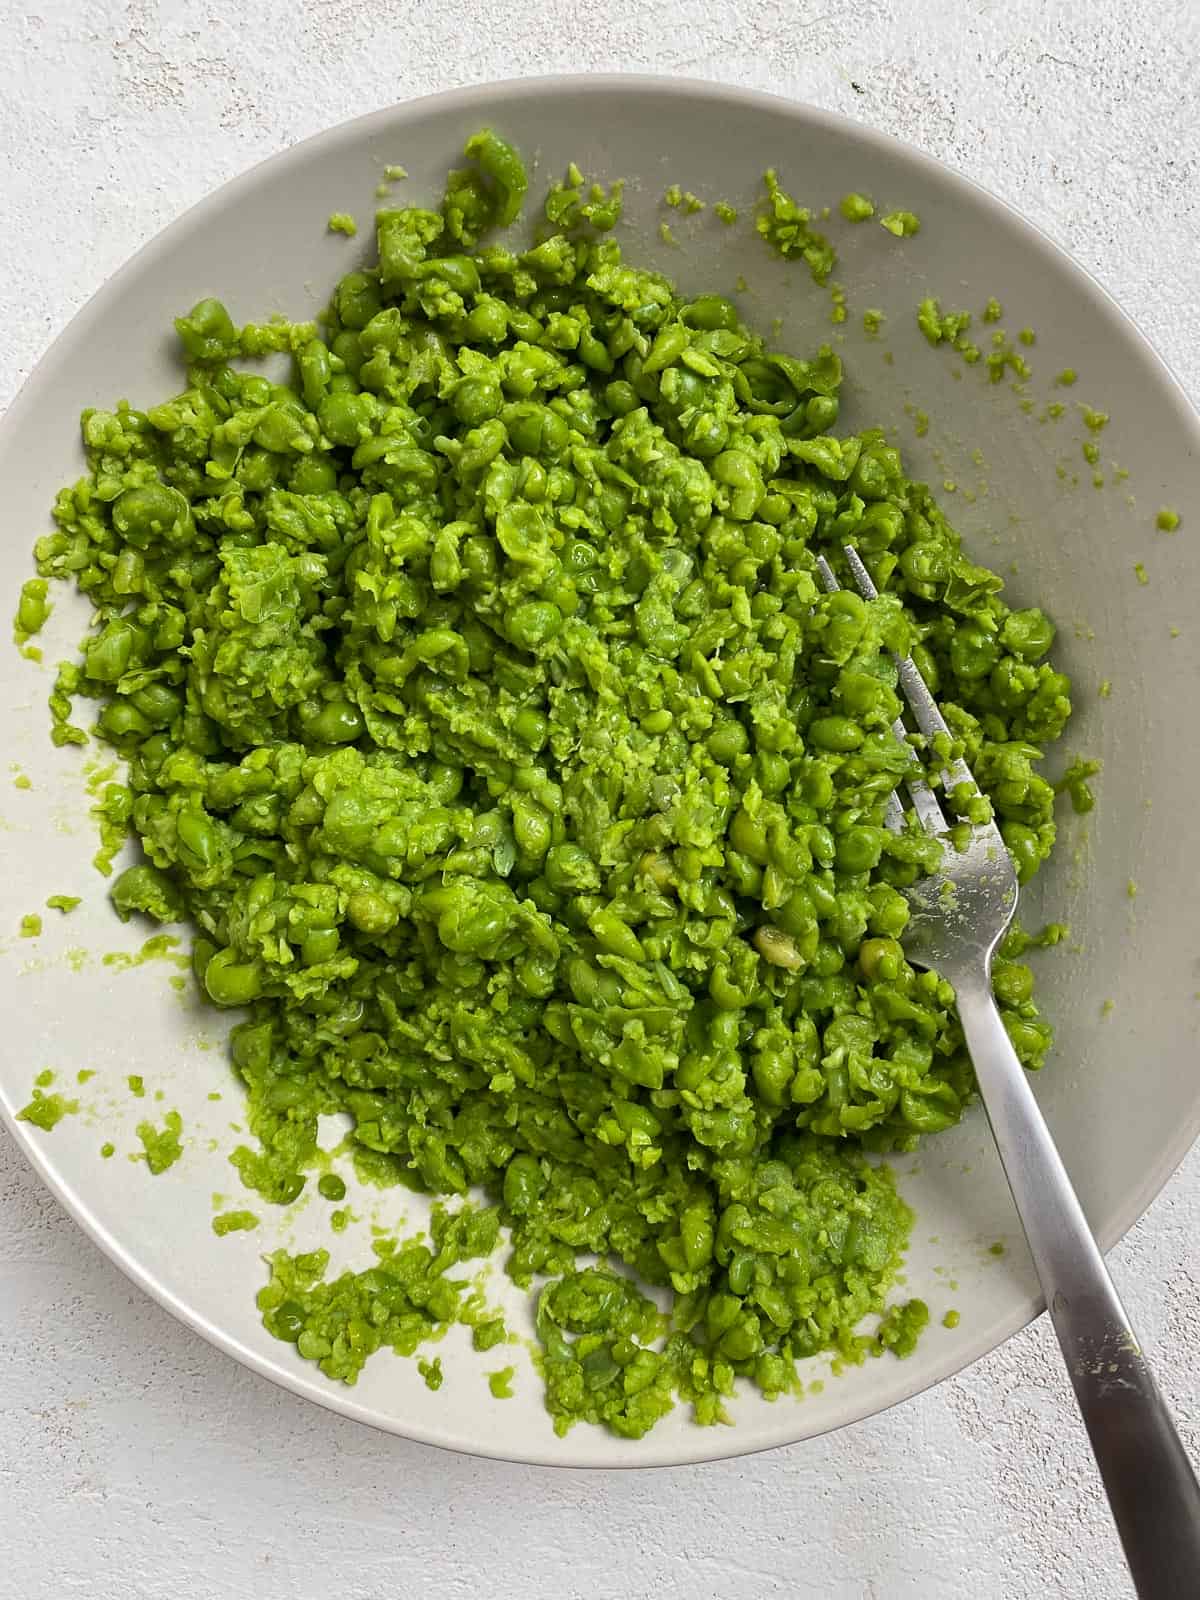 post mashing of peas in a white dish